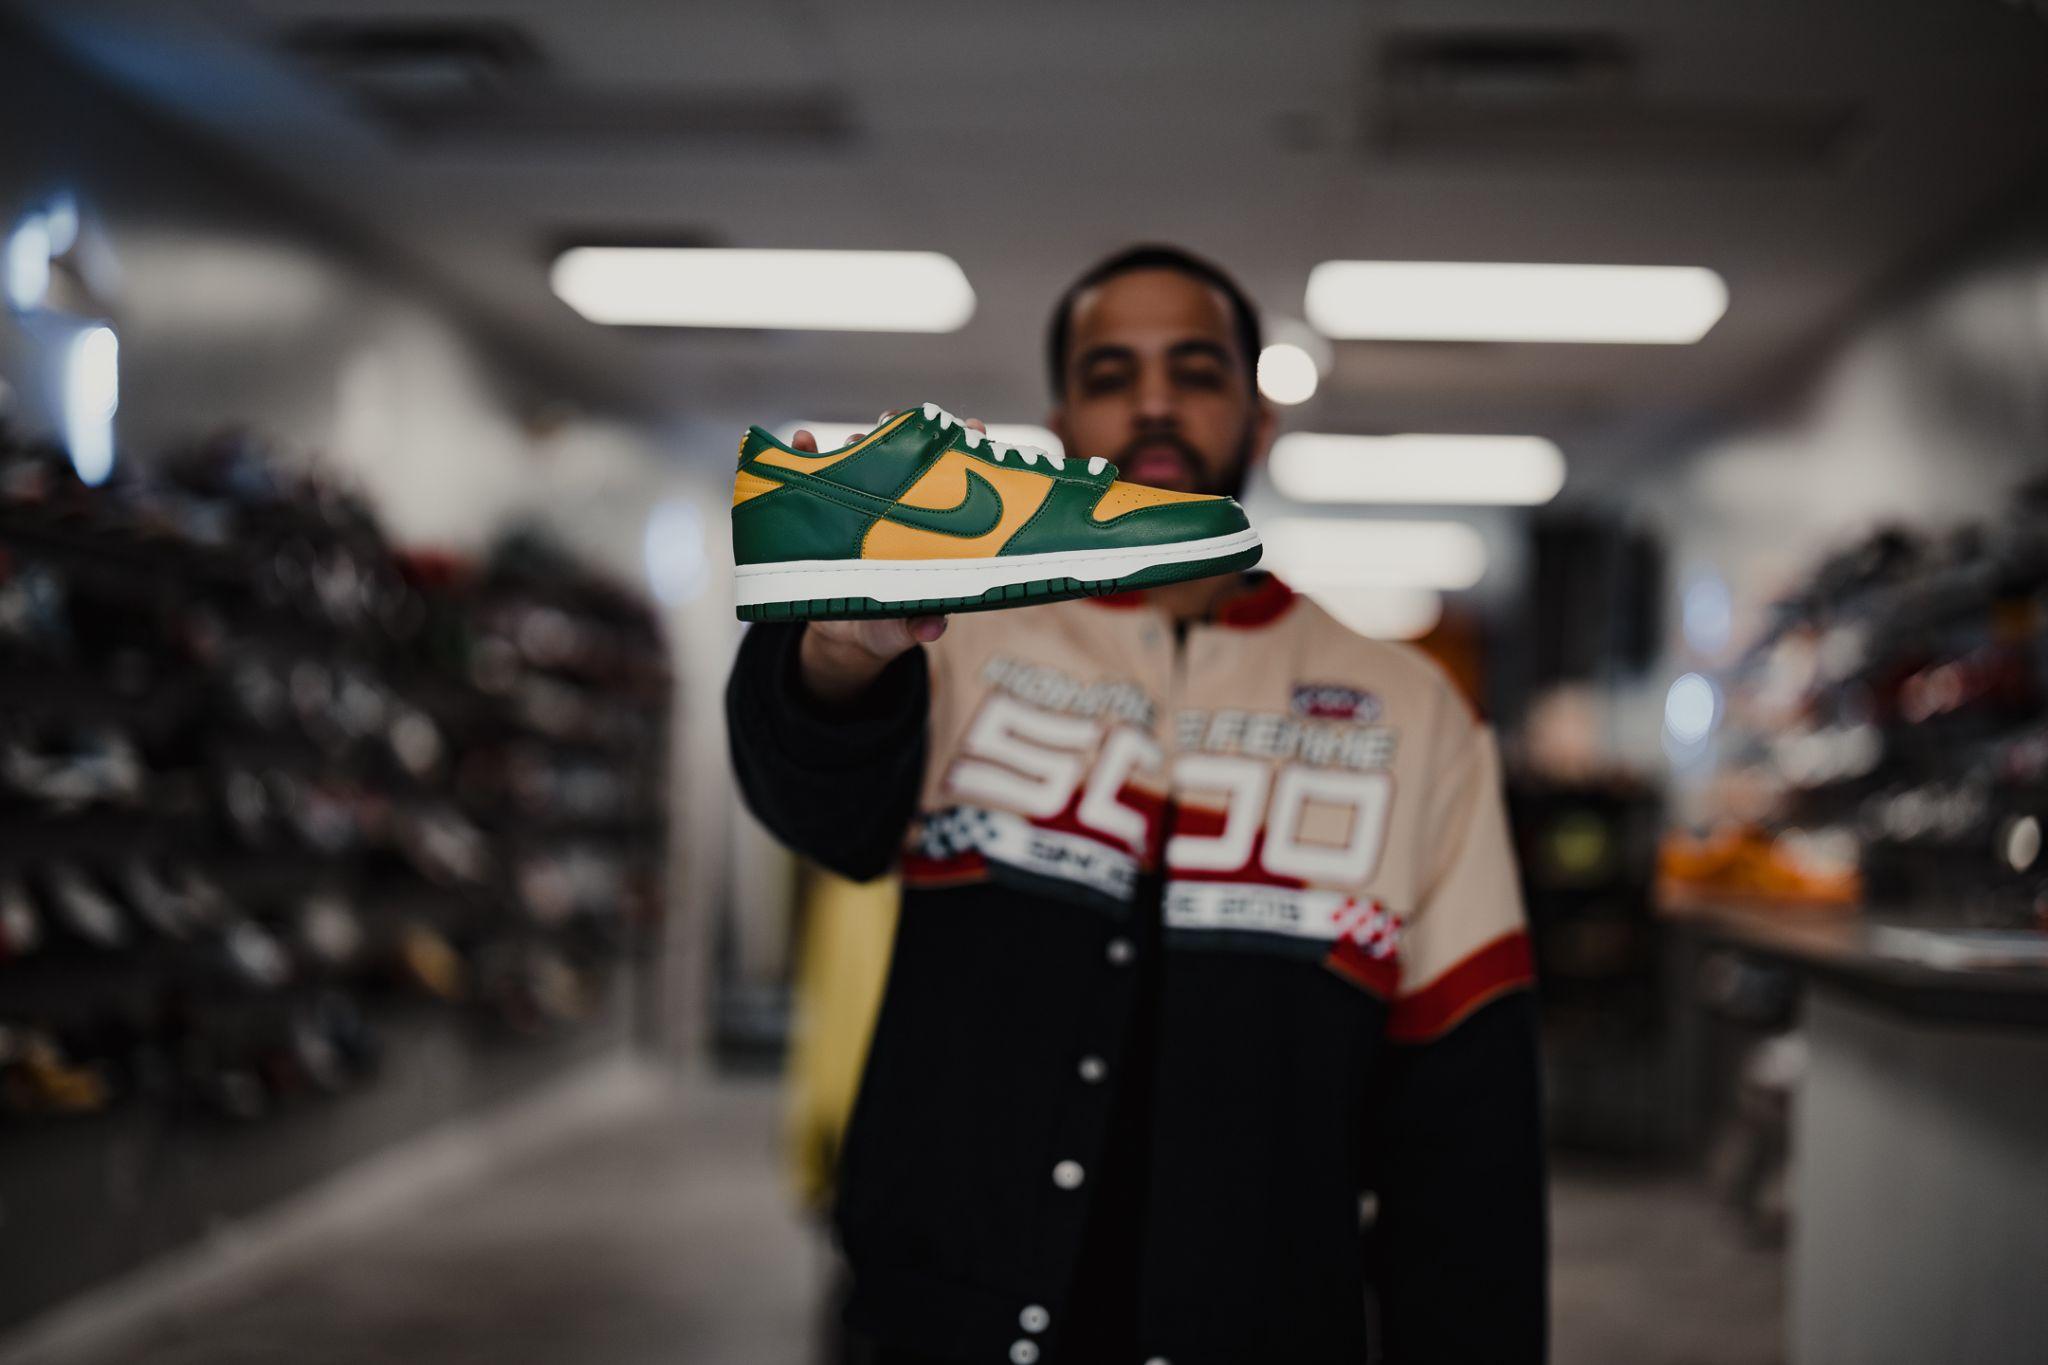 Classic Kickz: Takes a step in the right direction with SBDC partnership